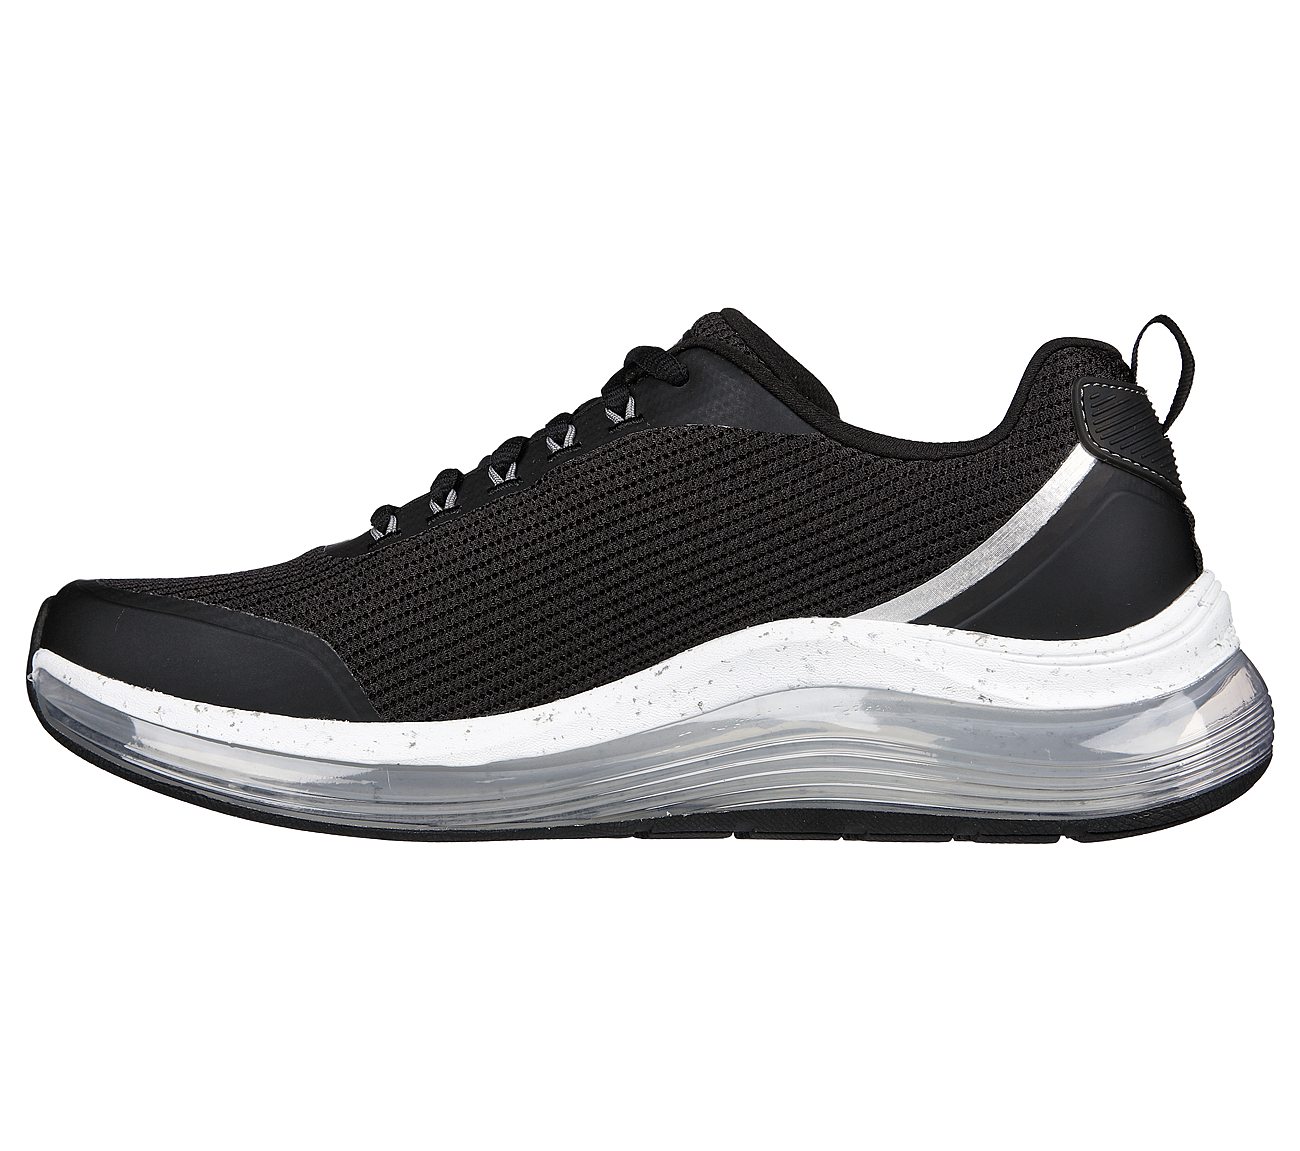 ARCH FIT ELEMENT AIR, BLACK/WHITE Footwear Left View